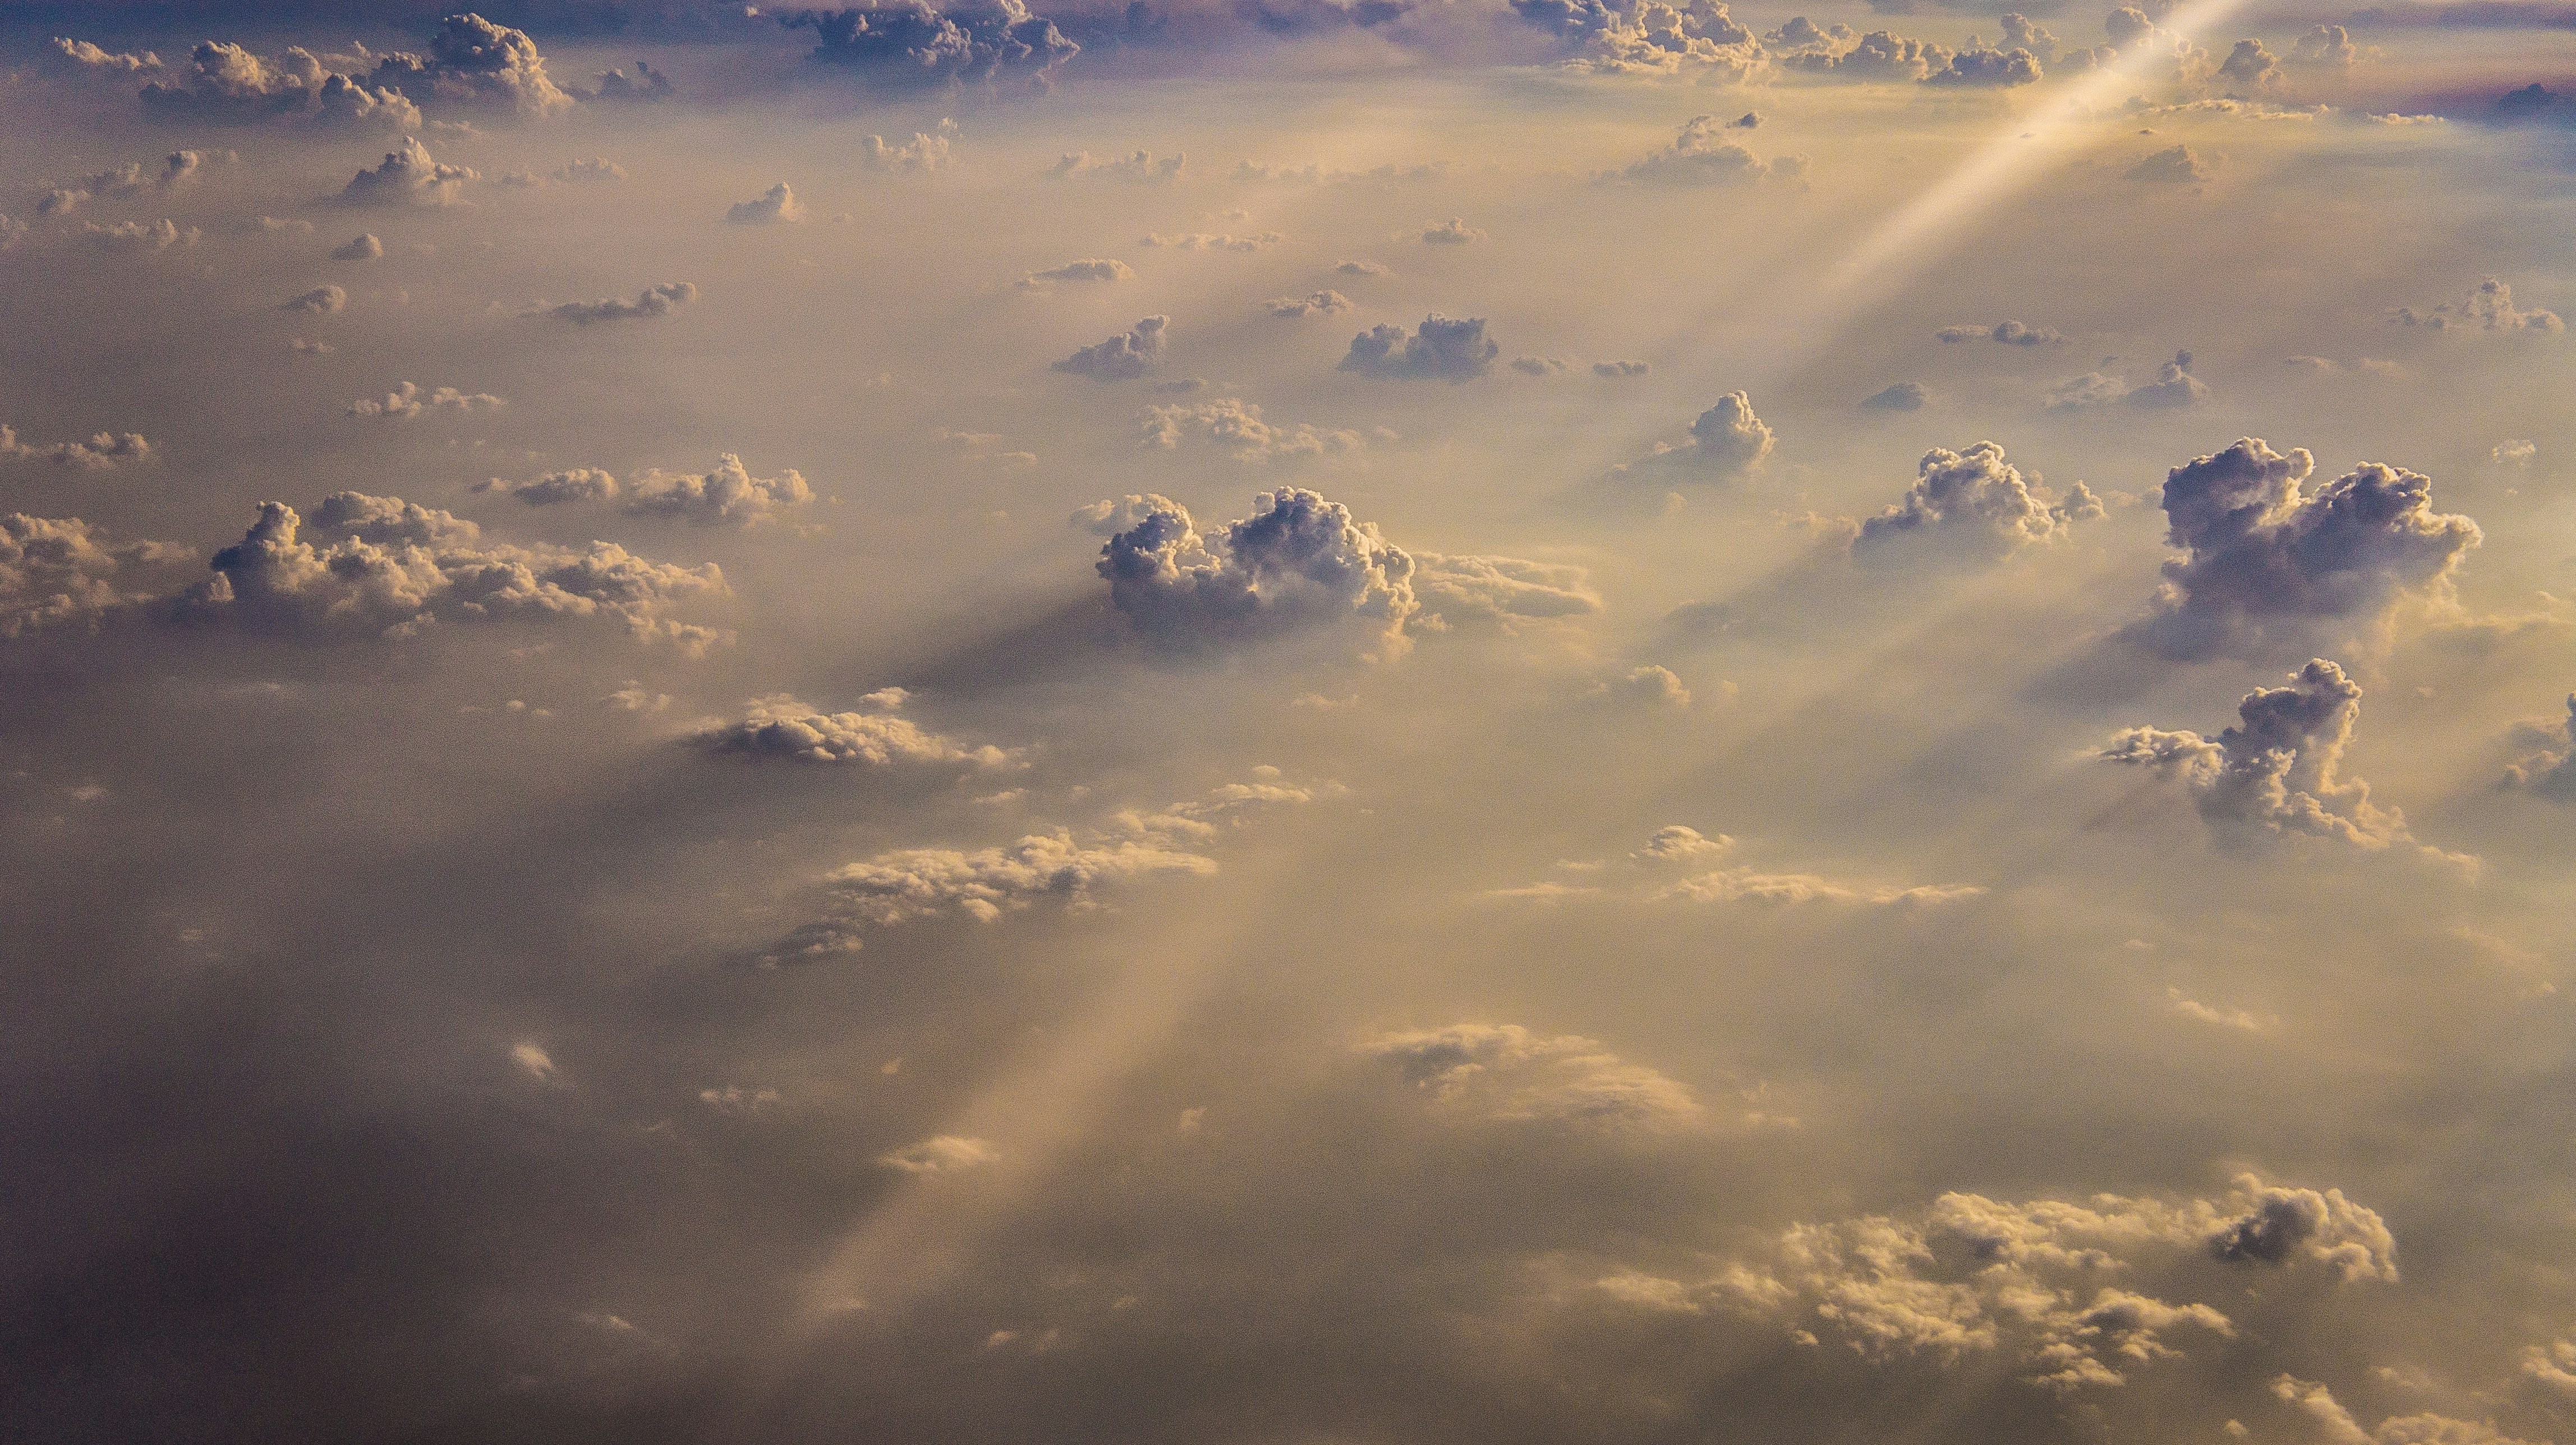 sunlight and clouds formations